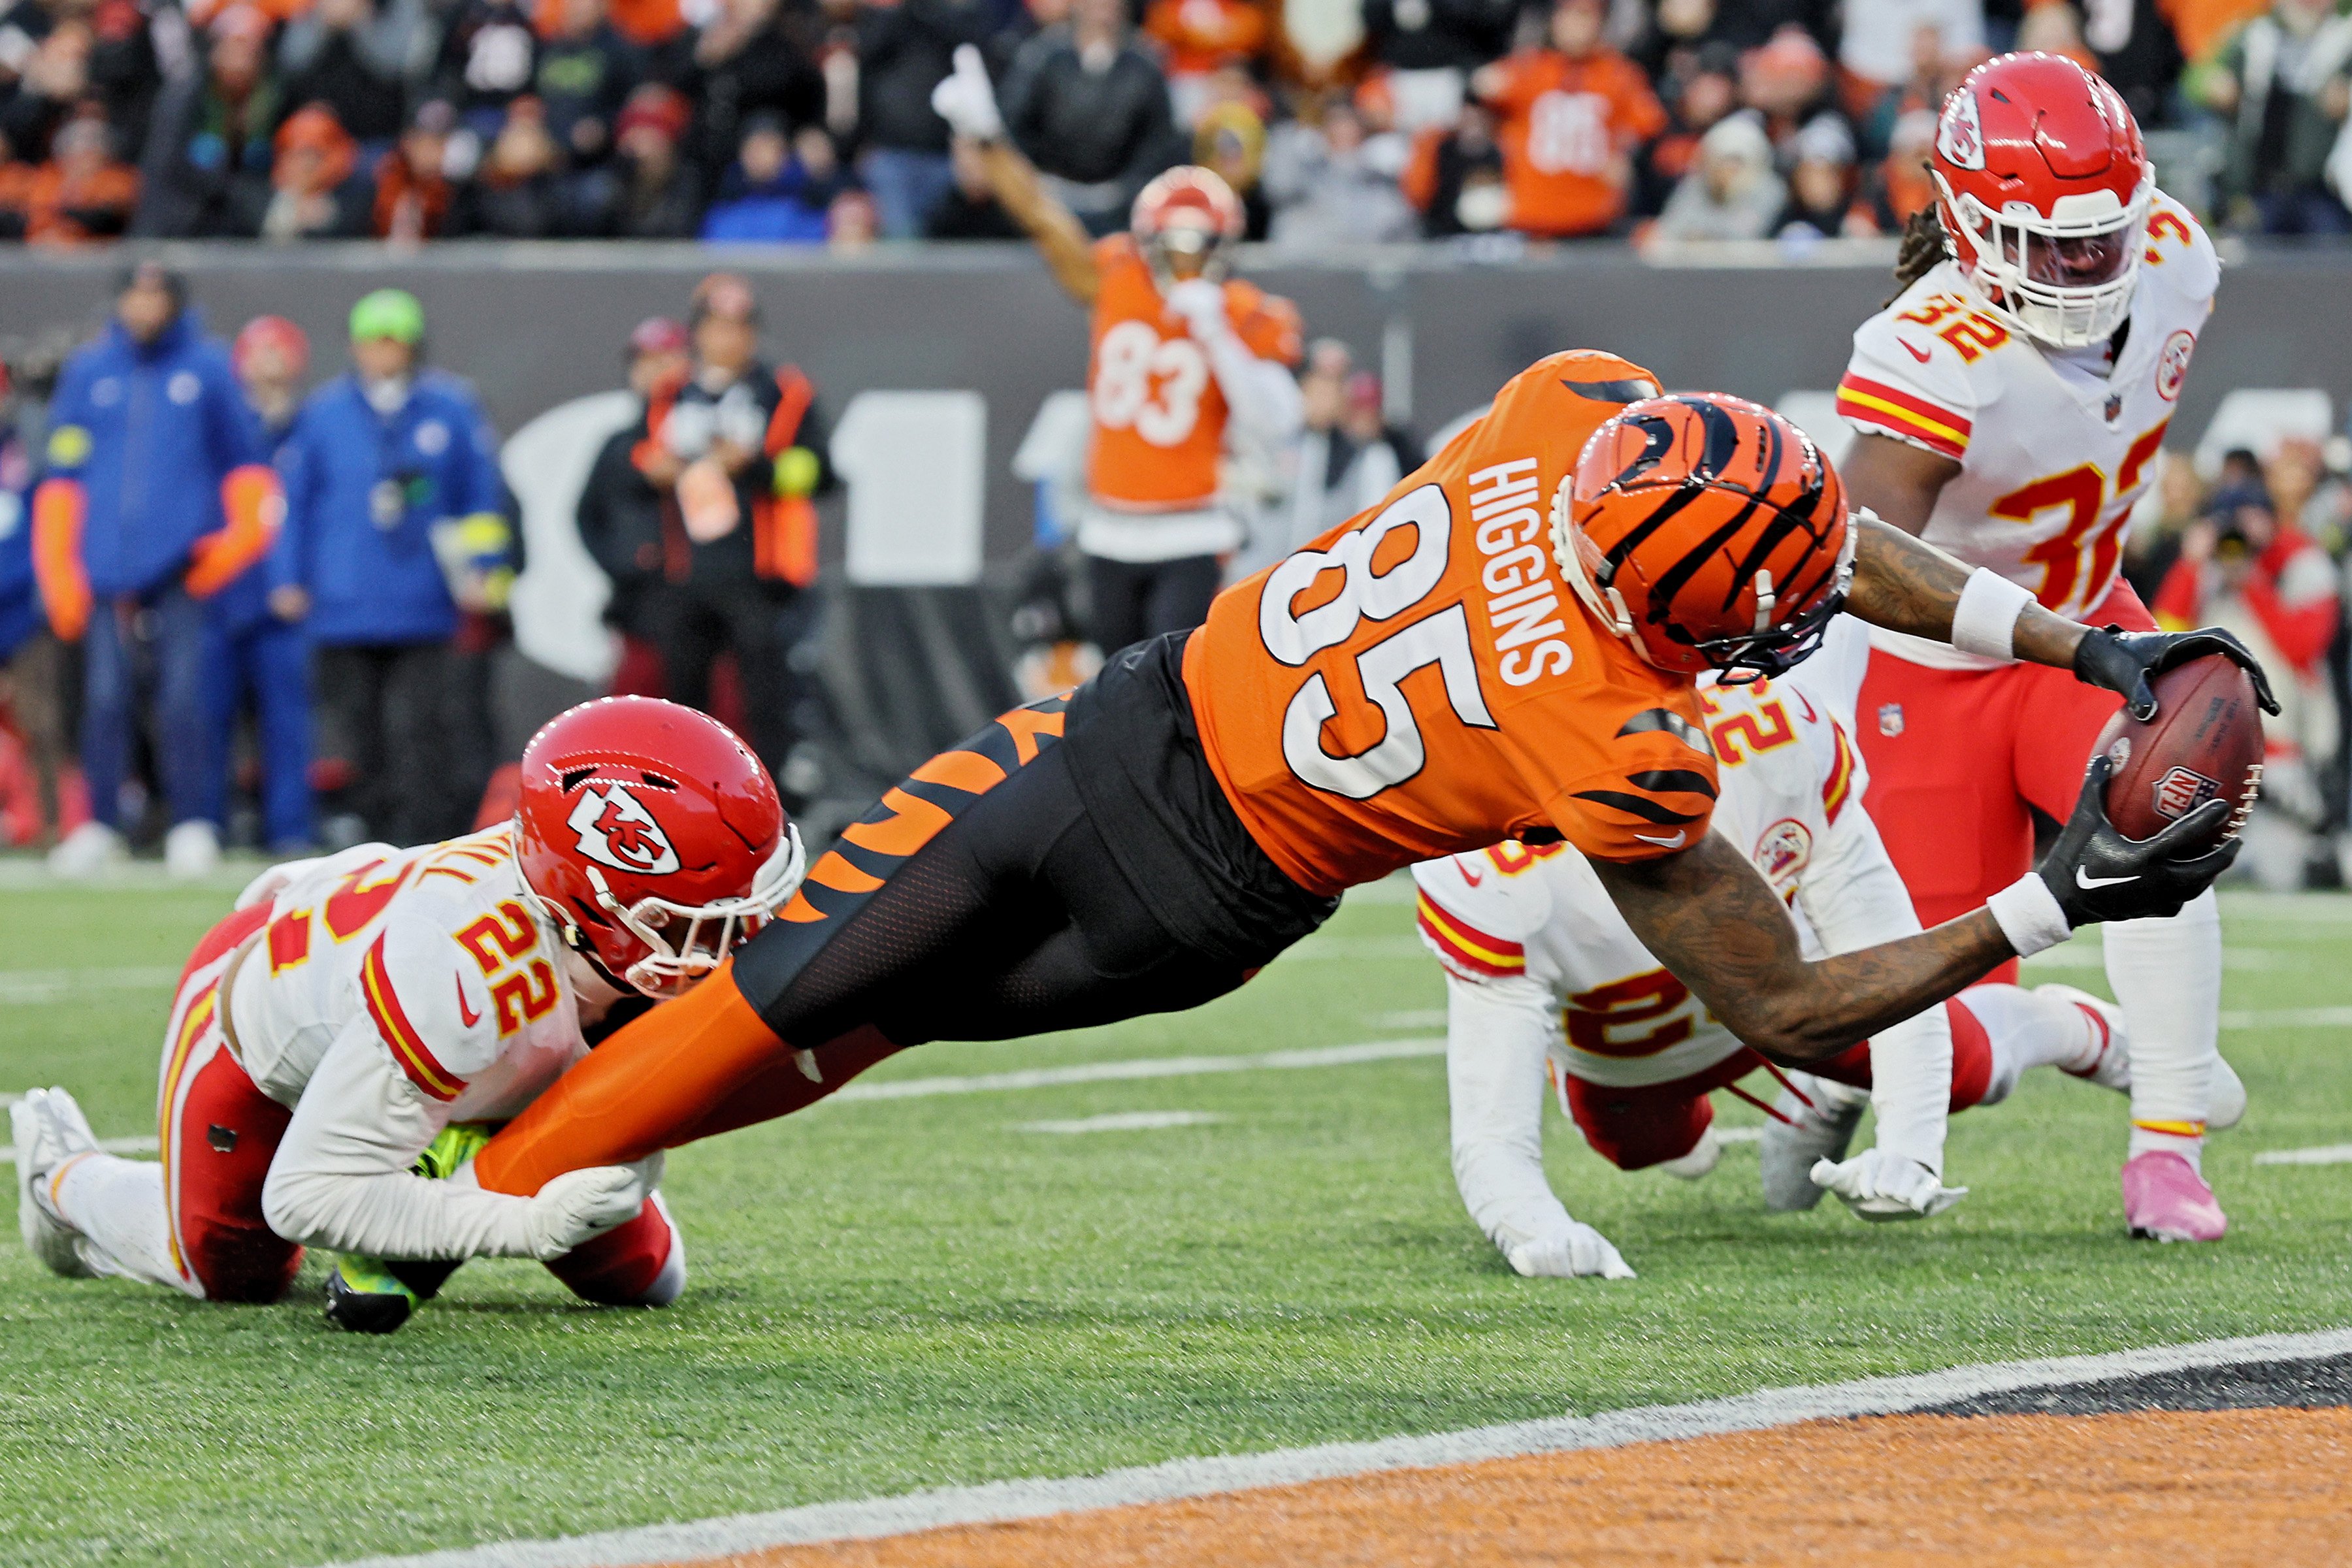 Tee Higgins #85 of the Cincinnati Bengals scores a touchdown against the Kansas City Chiefs during the second quarter at Paycor Stadium on December 04, 2022 in Cincinnati, Ohio.